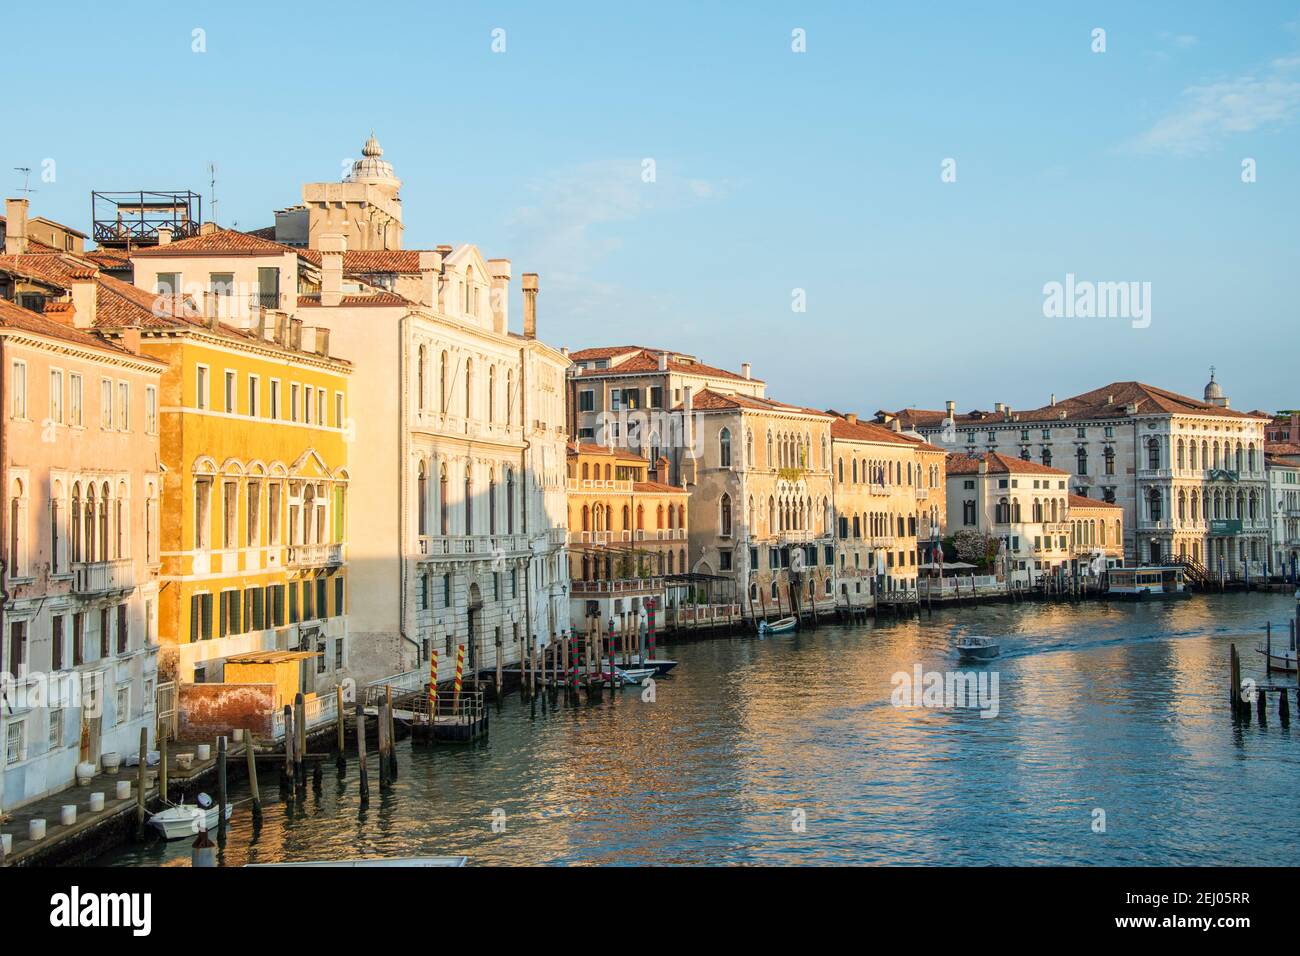 Building on the Grand Canal, city of Venice, Italy, Europe Stock Photo